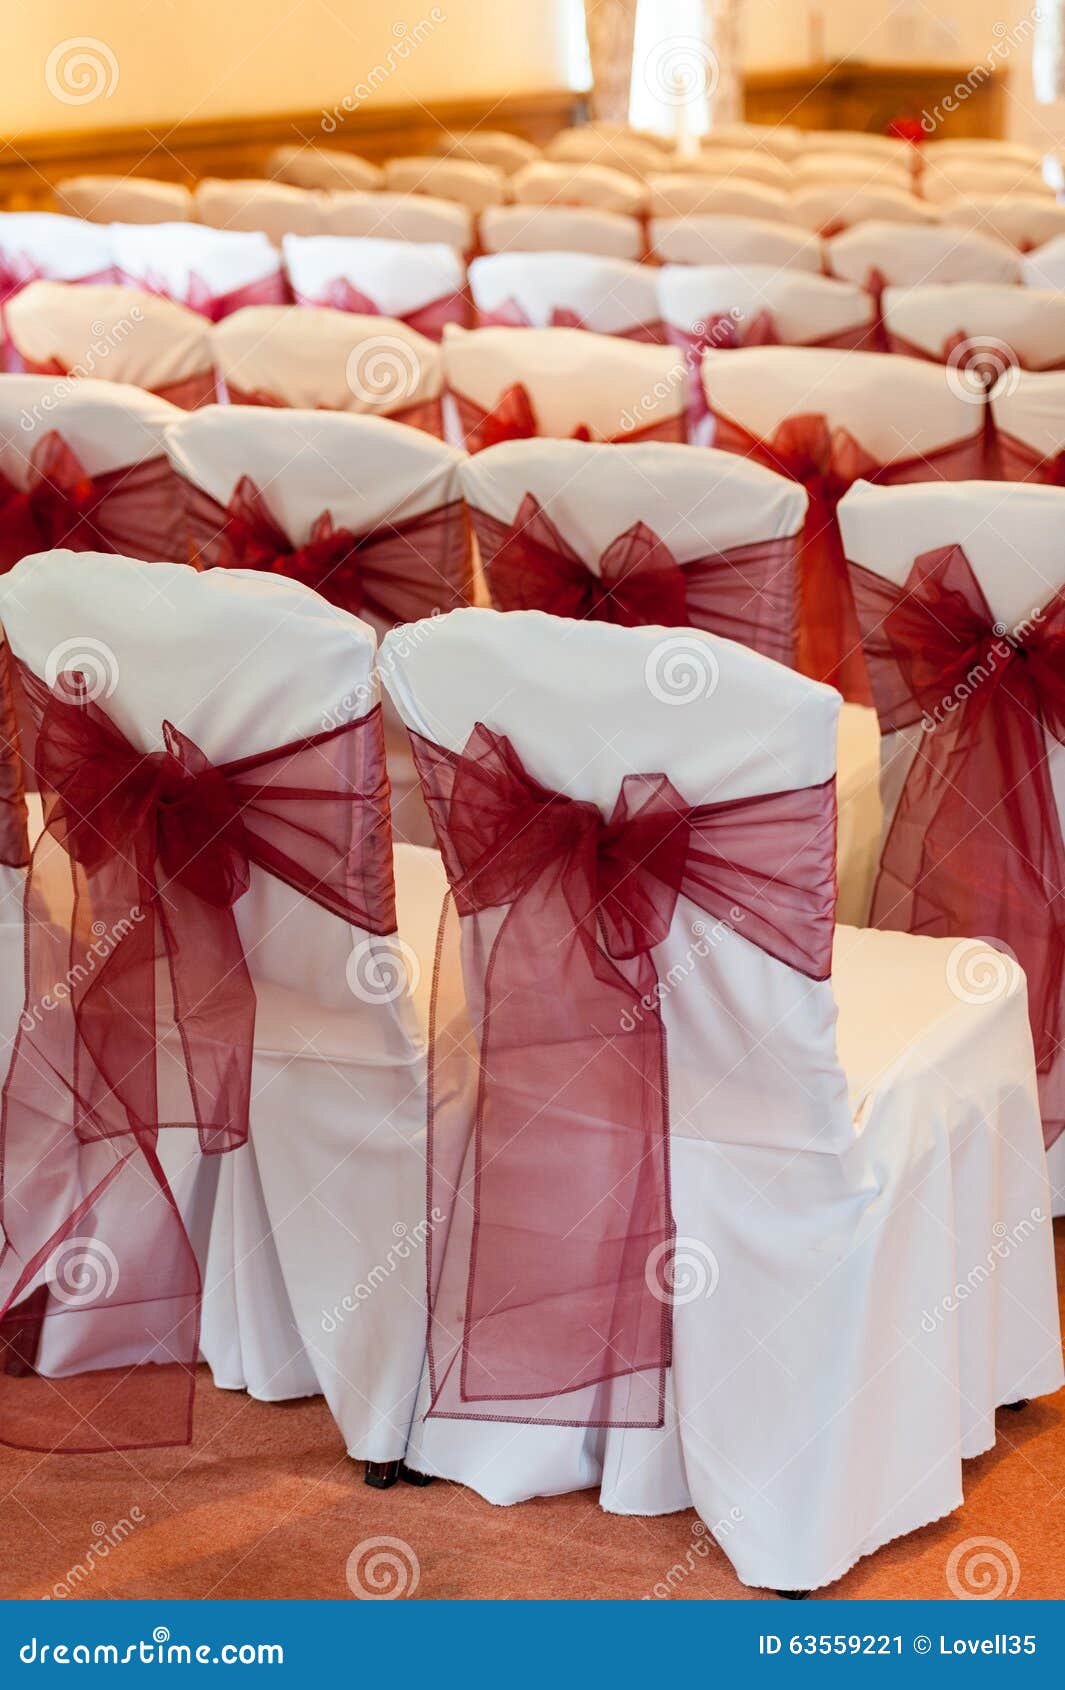 Wedding Chair Bows Stock Image Image Of Covers Image 63559221